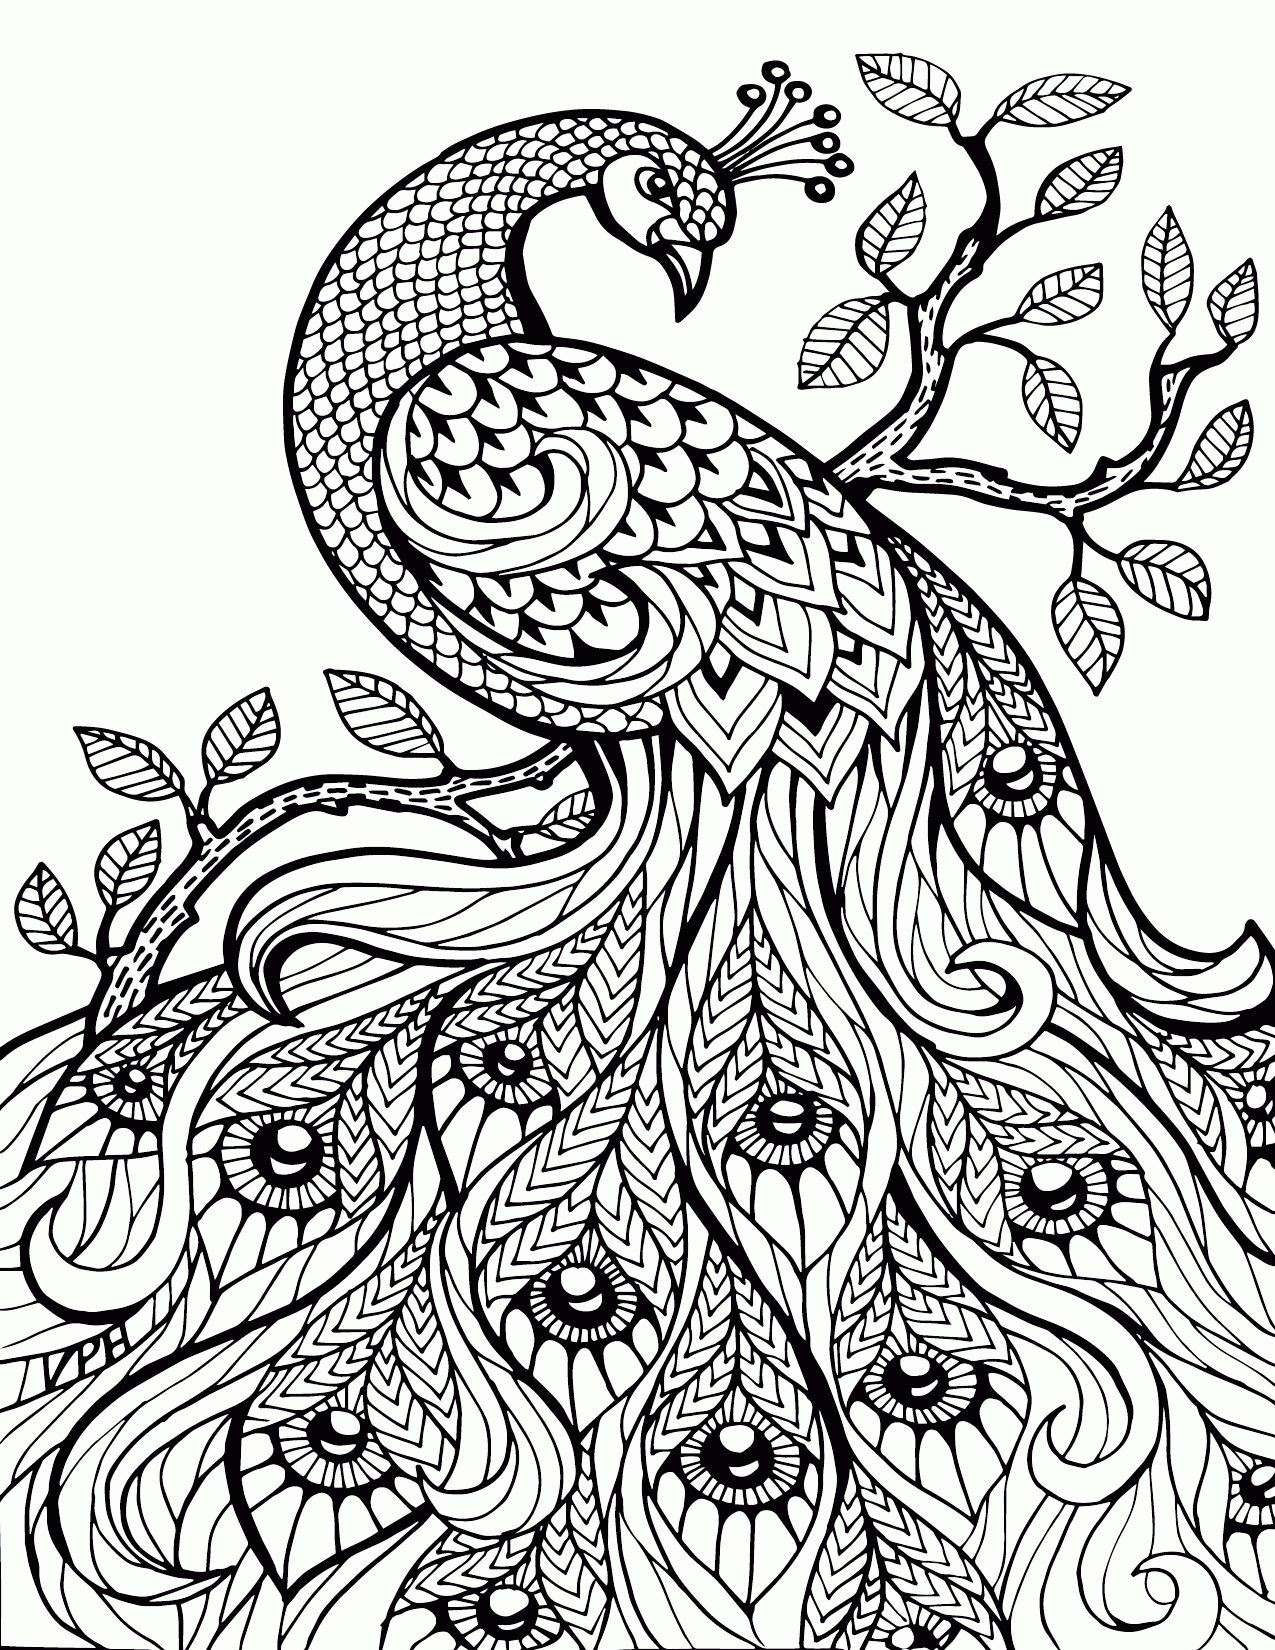 Free Coloring Pages For Adults Printable Easy To Color Animals - Coloring  Home